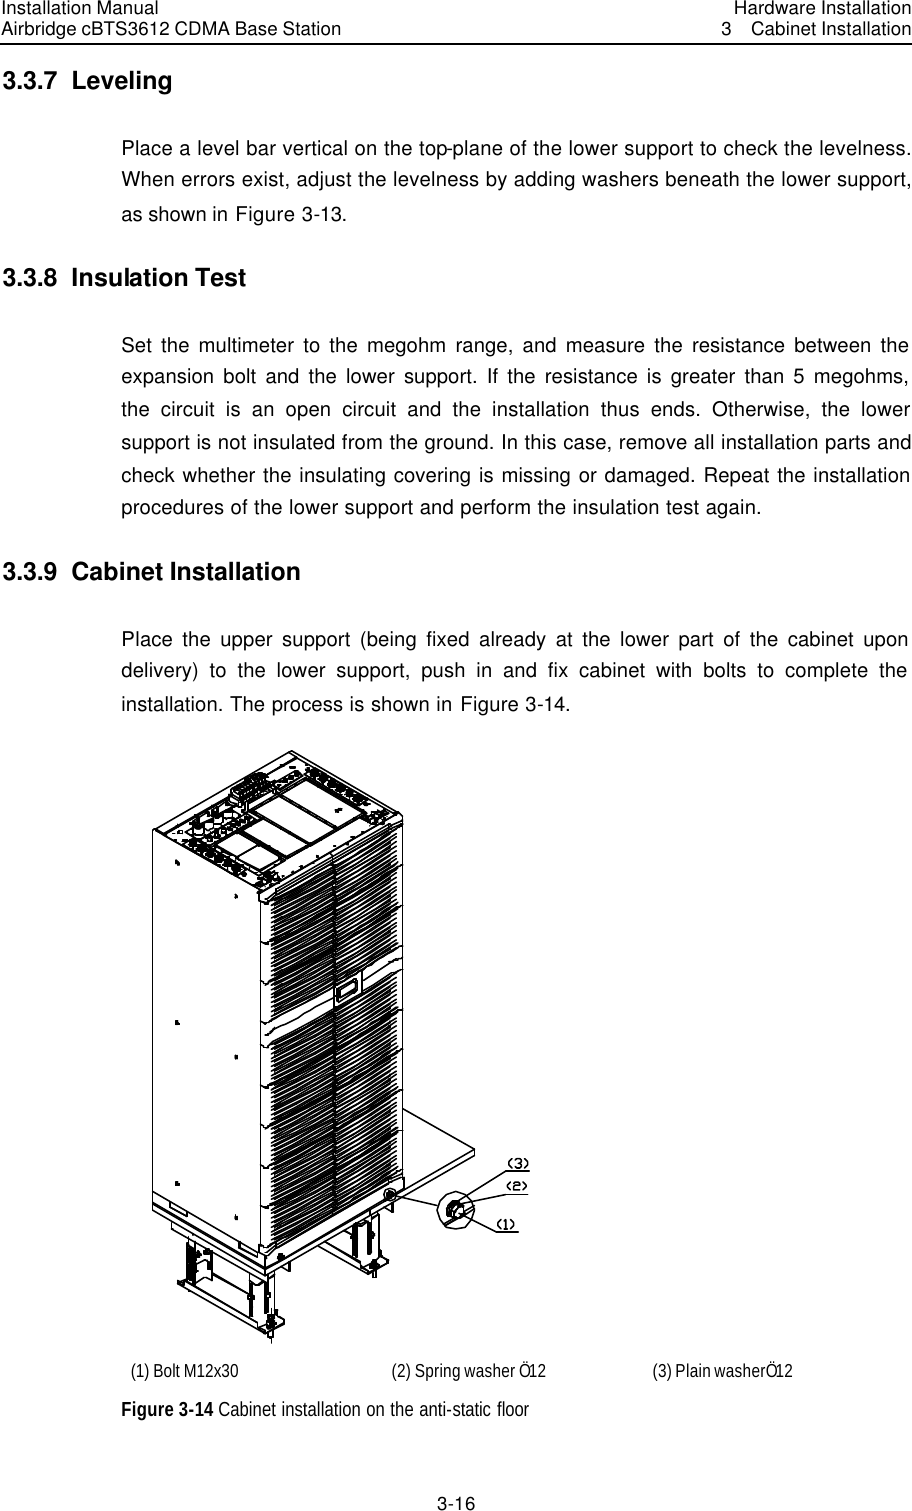 Installation Manual Airbridge cBTS3612 CDMA Base Station Hardware Installation3  Cabinet Installation 3-16　3.3.7  Leveling Place a level bar vertical on the top-plane of the lower support to check the levelness. When errors exist, adjust the levelness by adding washers beneath the lower support, as shown in Figure 3-13. 3.3.8  Insulation Test Set the multimeter to the megohm range, and measure the resistance between the expansion bolt and the lower support. If the resistance is greater than 5 megohms, the circuit is an open circuit and the installation thus ends. Otherwise, the lower support is not insulated from the ground. In this case, remove all installation parts and check whether the insulating covering is missing or damaged. Repeat the installation procedures of the lower support and perform the insulation test again.   3.3.9  Cabinet Installation Place the upper support (being fixed already at the lower part of the cabinet upon delivery) to the lower support, push in and fix cabinet with bolts to complete the installation. The process is shown in Figure 3-14.  (1) Bolt M12x30 (2) Spring washer Ö12 (3) Plain washerÖ12 Figure 3-14 Cabinet installation on the anti-static floor 